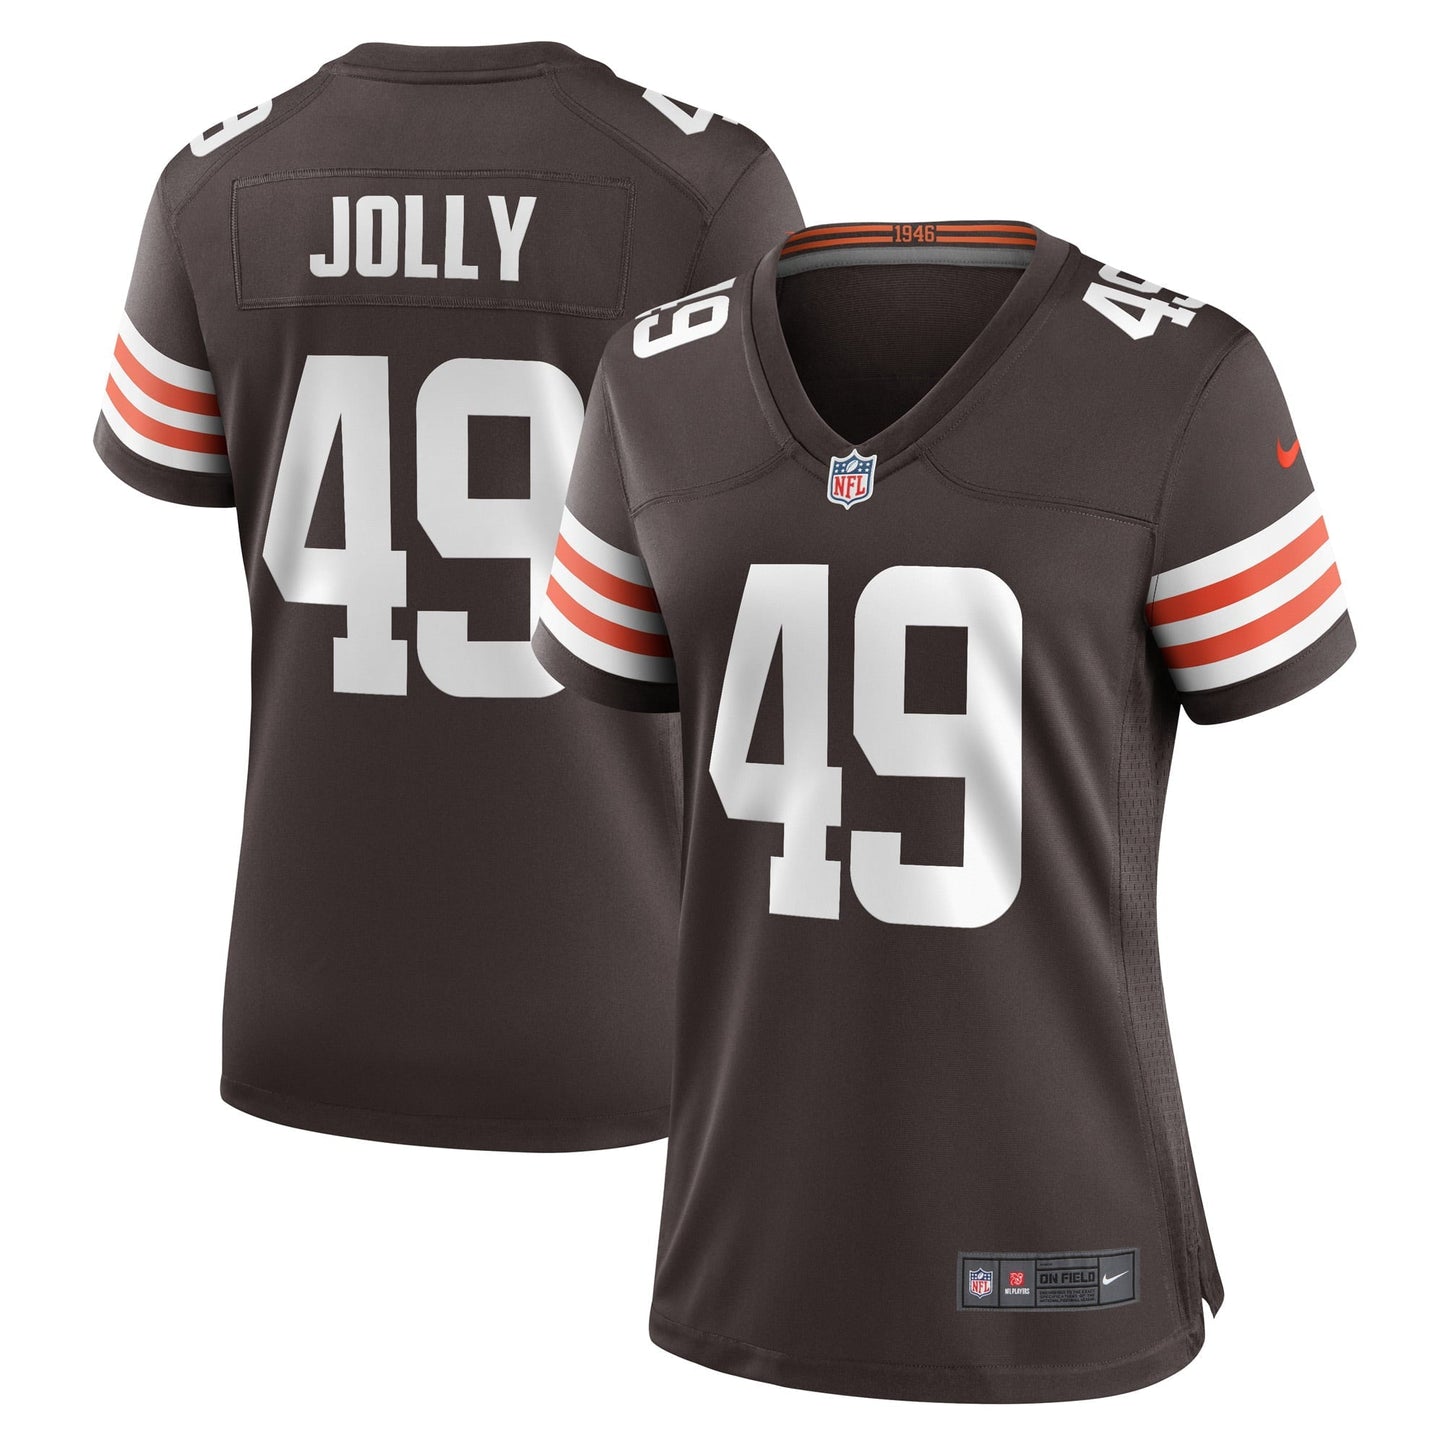 Women's Nike Shaun Jolly Brown Cleveland Browns Game Player Jersey